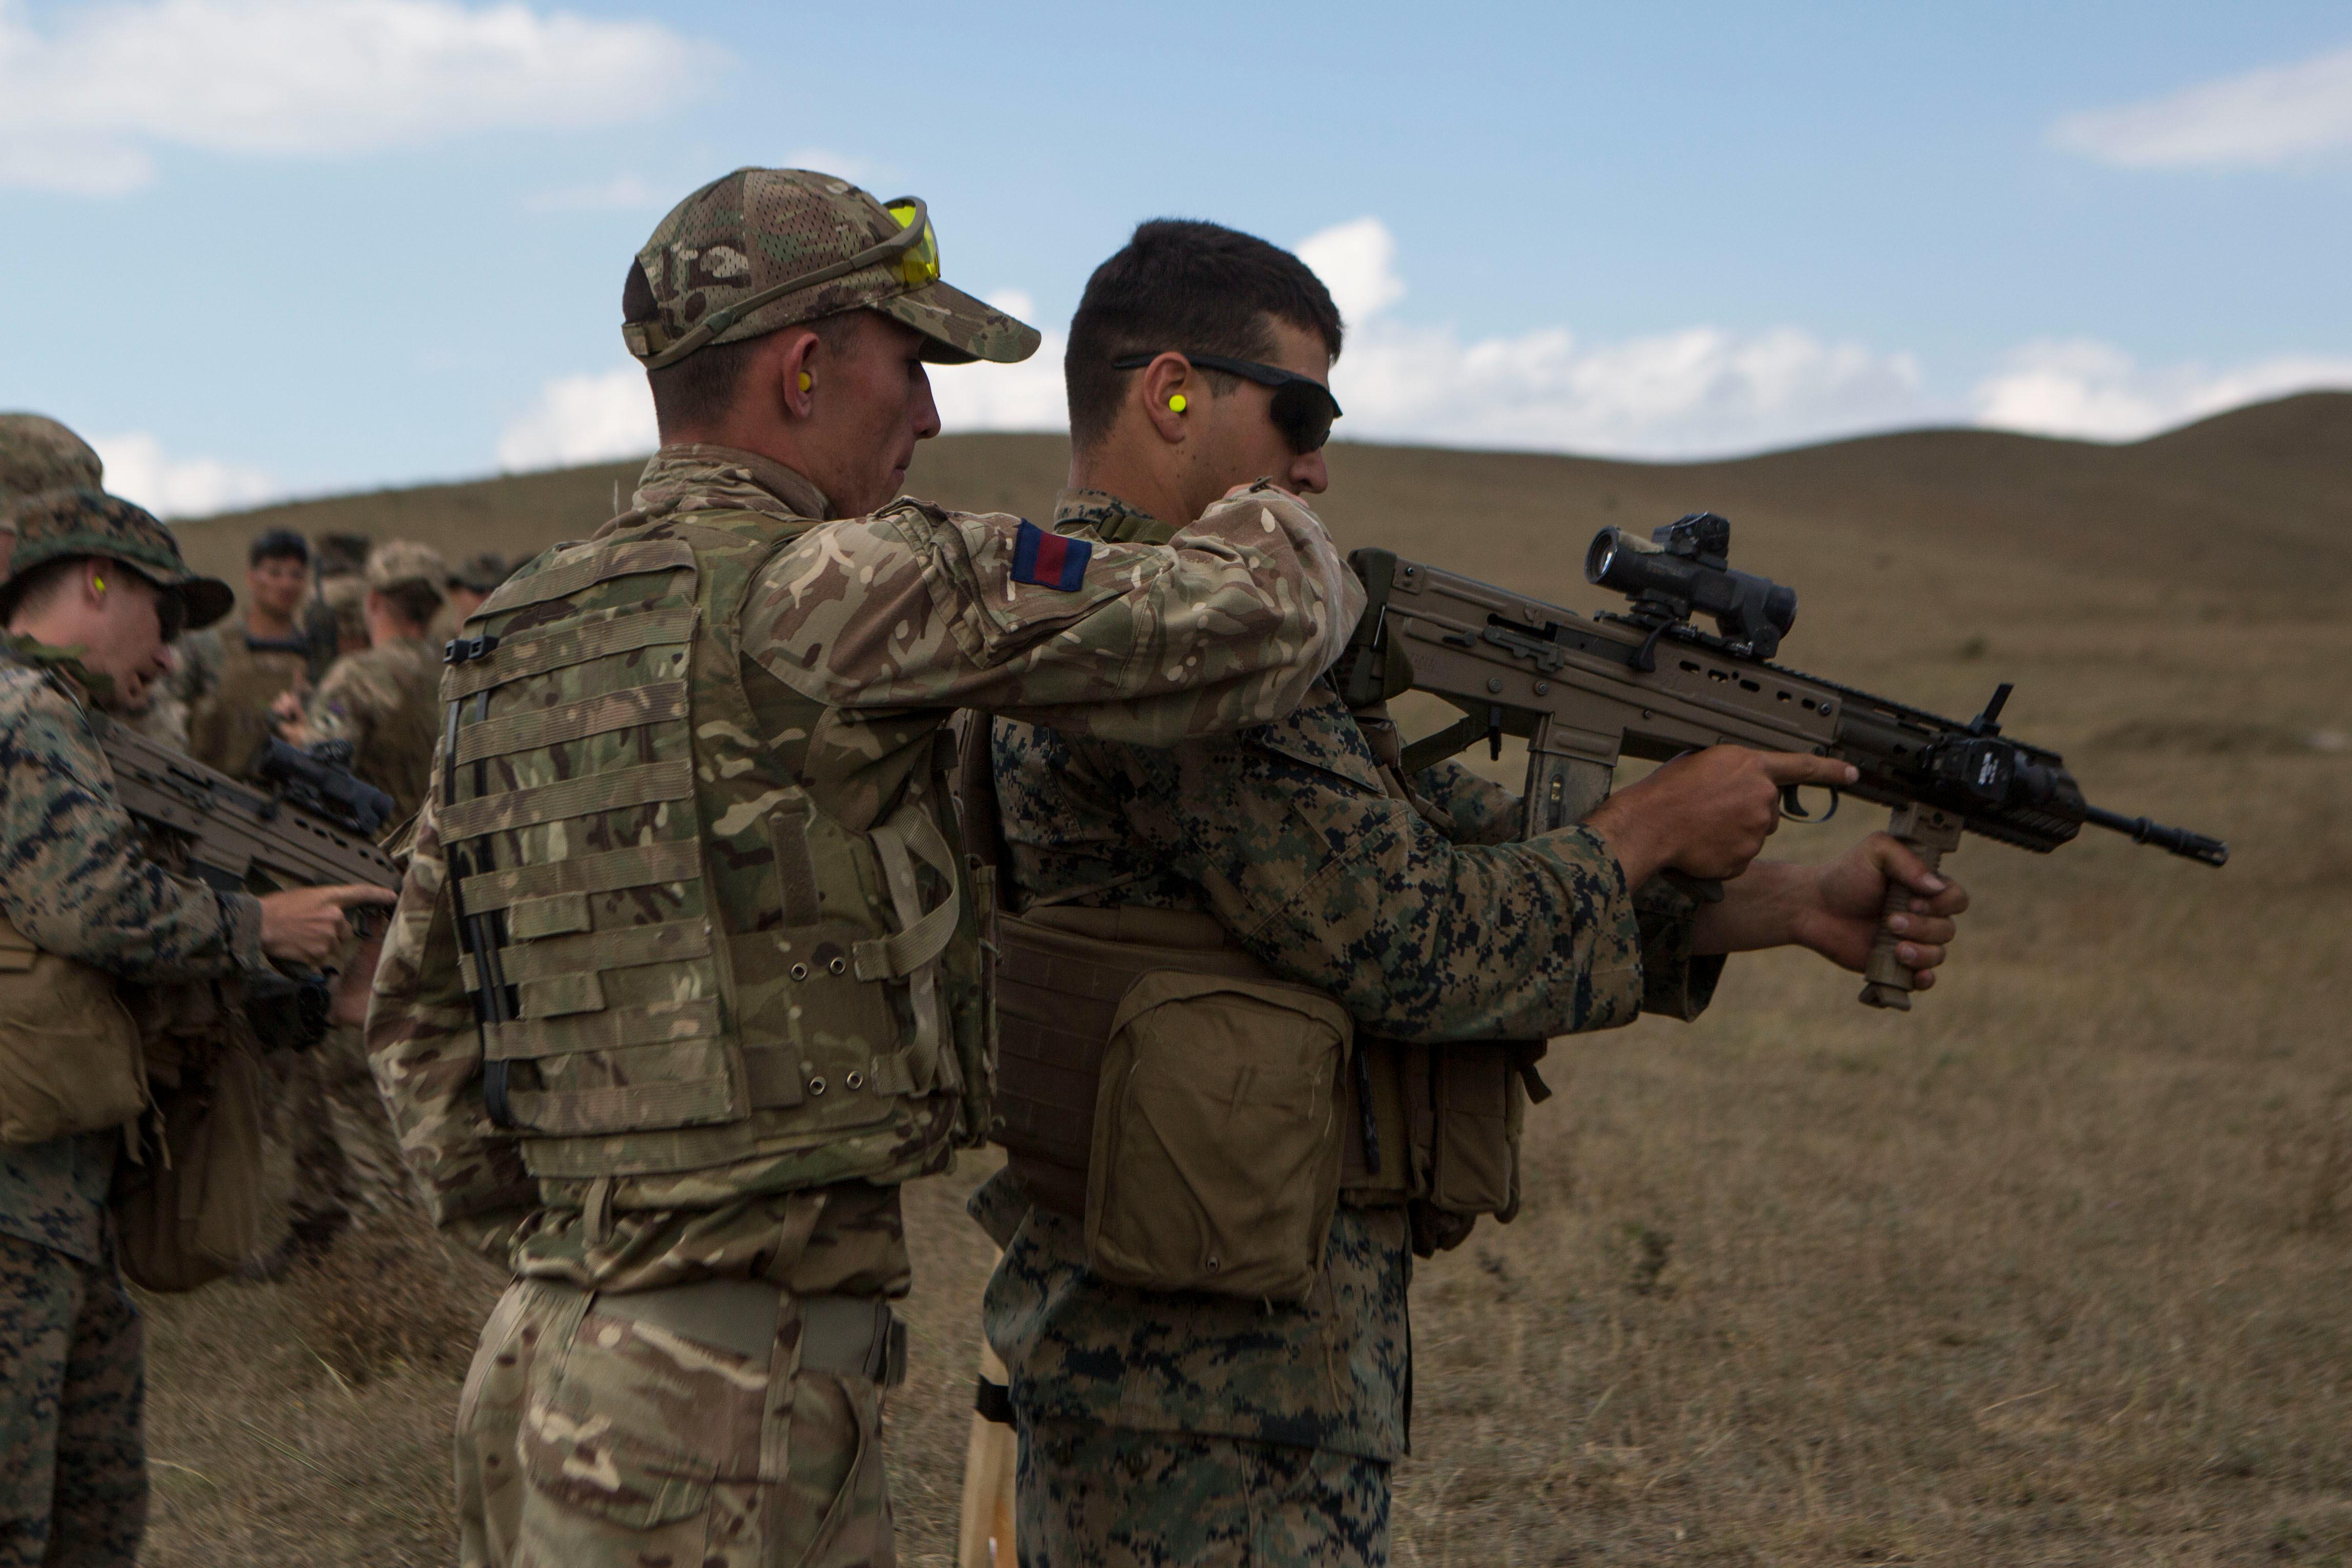 A U.K. Army soldier with Irish Guards shows A U.S. Marine with Marine Rotational Force-Europe 19.2, Marine Forces Europe and Africa, how to fire a L85A3 rifle during exercise Agile Spirit 2019 in Orpholo, Georgia, August 2, 2019. AgS19 is a joint, multinational exercise that enhances U.S., Georgian, allied and partner forces lethality, interoperability and readiness in a realistic training environment. (U.S. Marine Corps photo by Lance Cpl. Larisa Chavez)